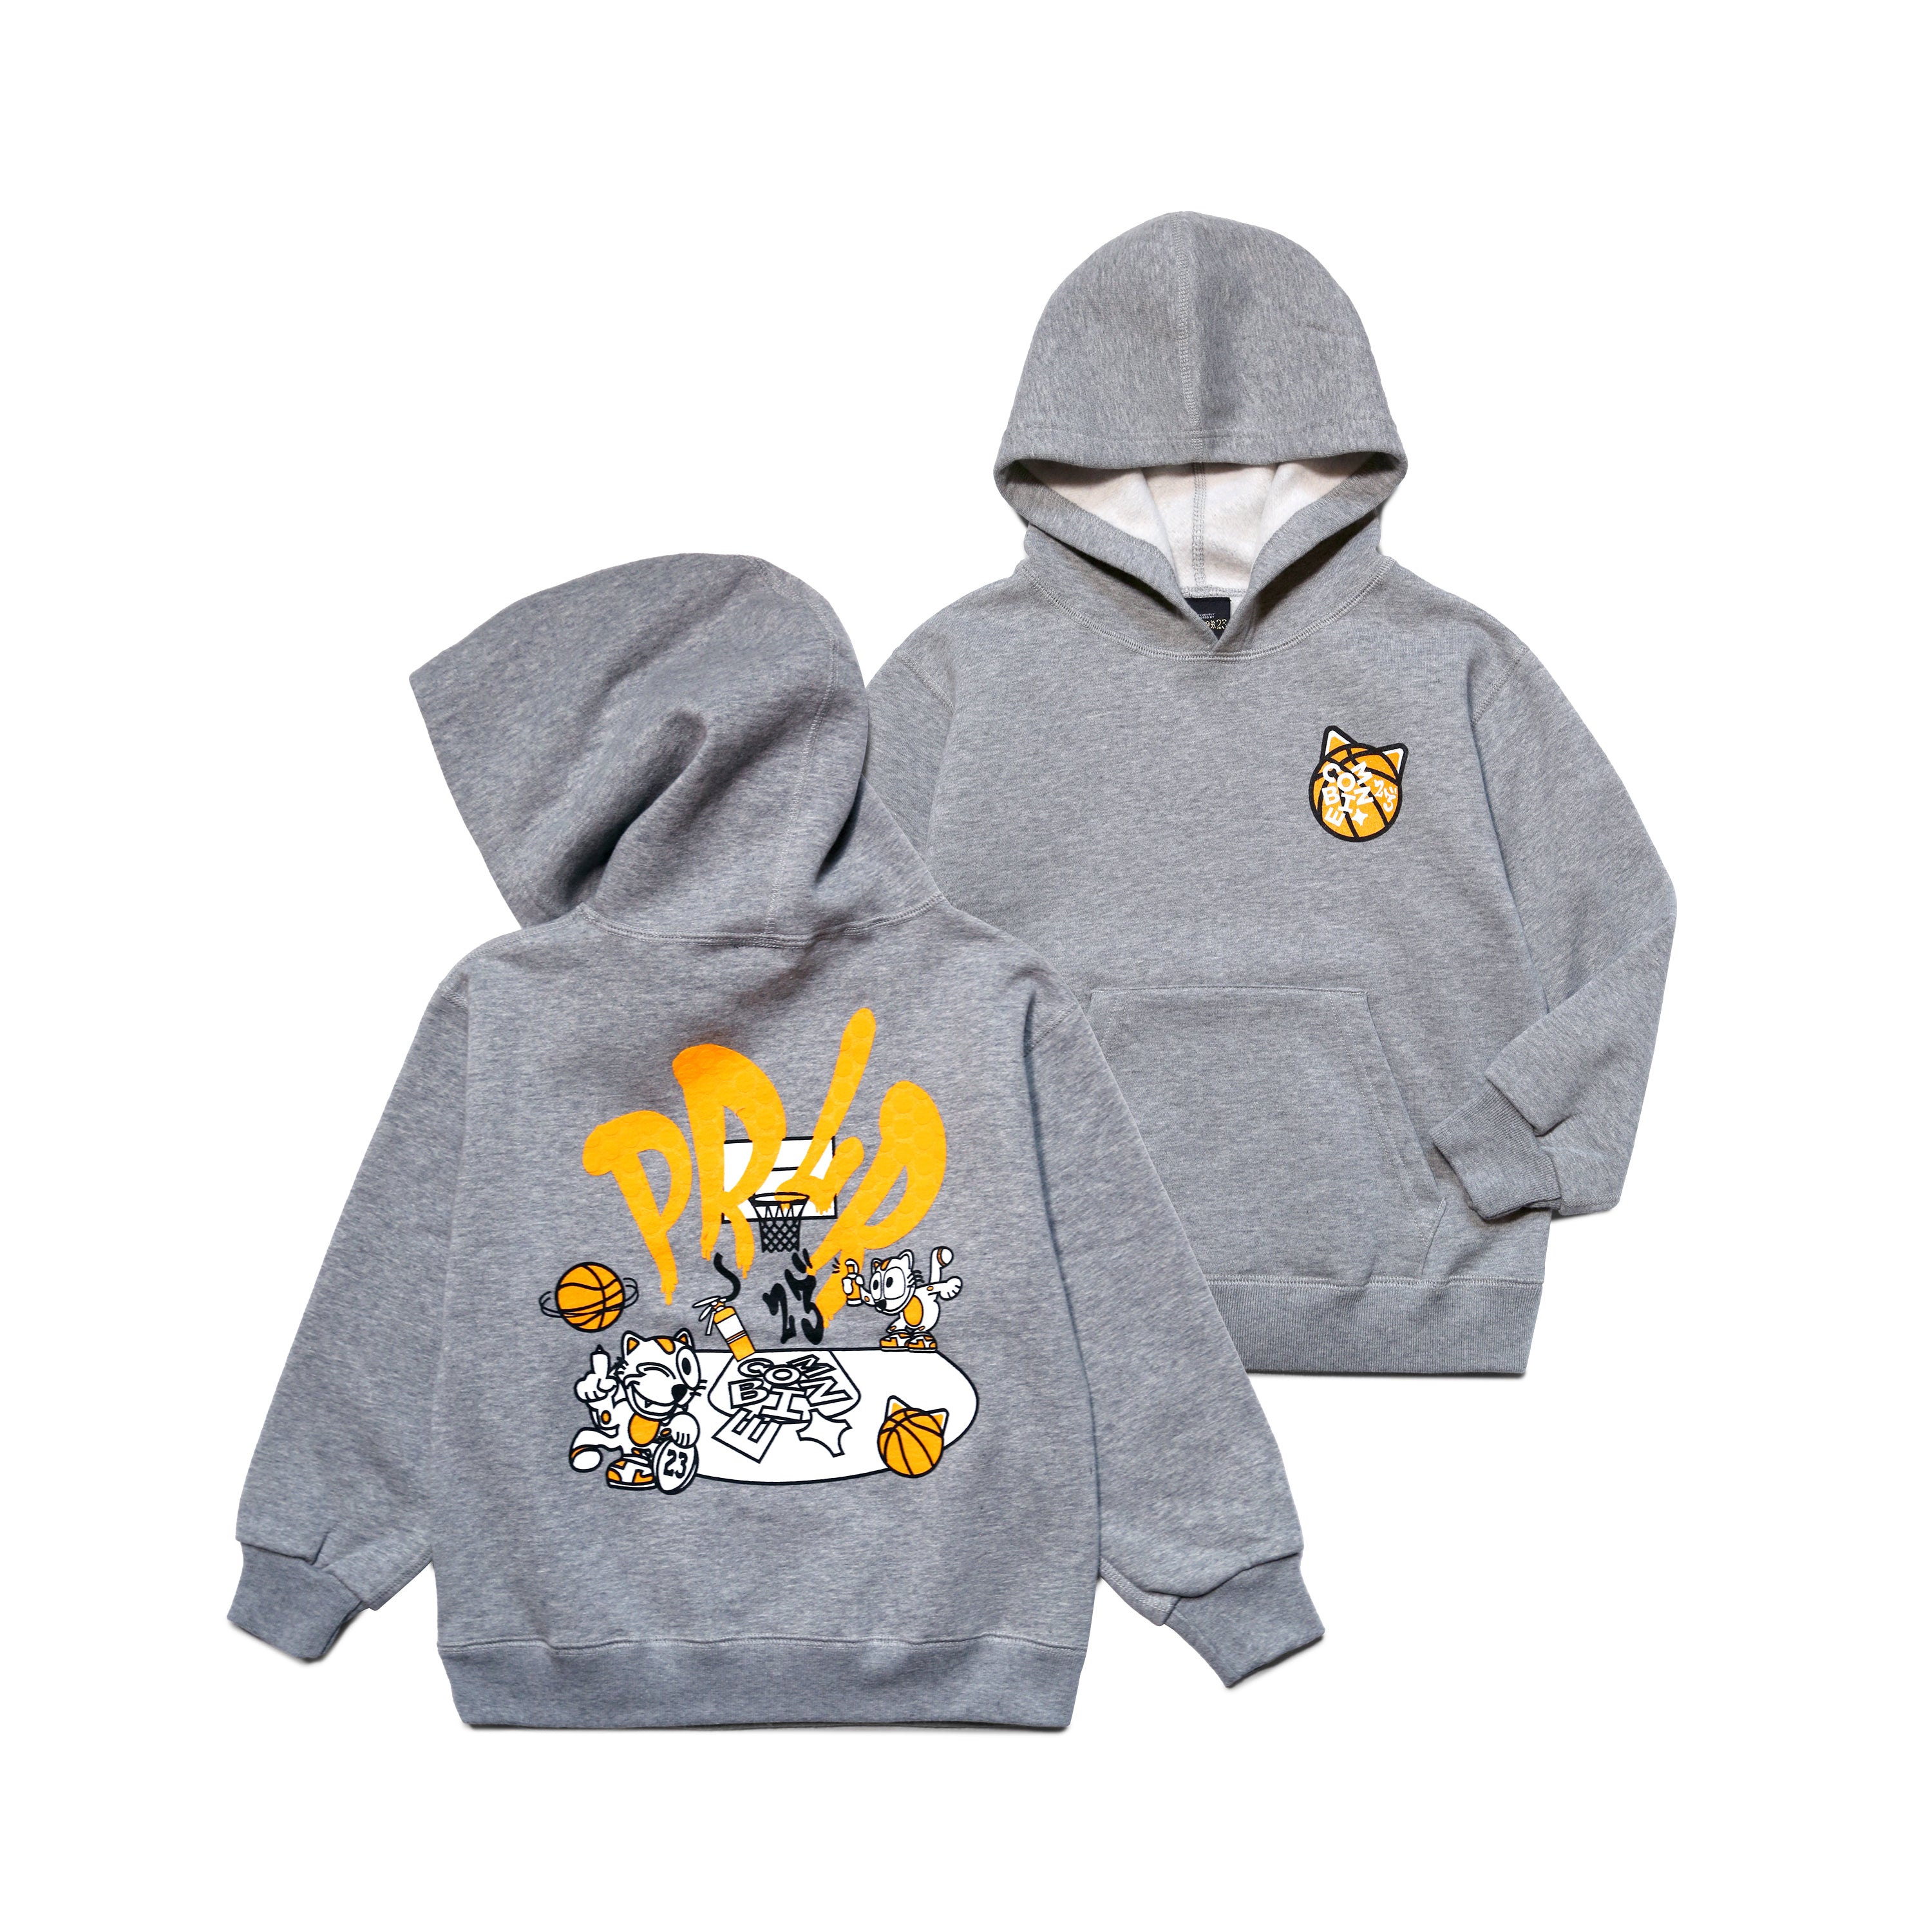 Parlor 23 x Combine "Shoot Out" Made in Canada Youth Hoodie